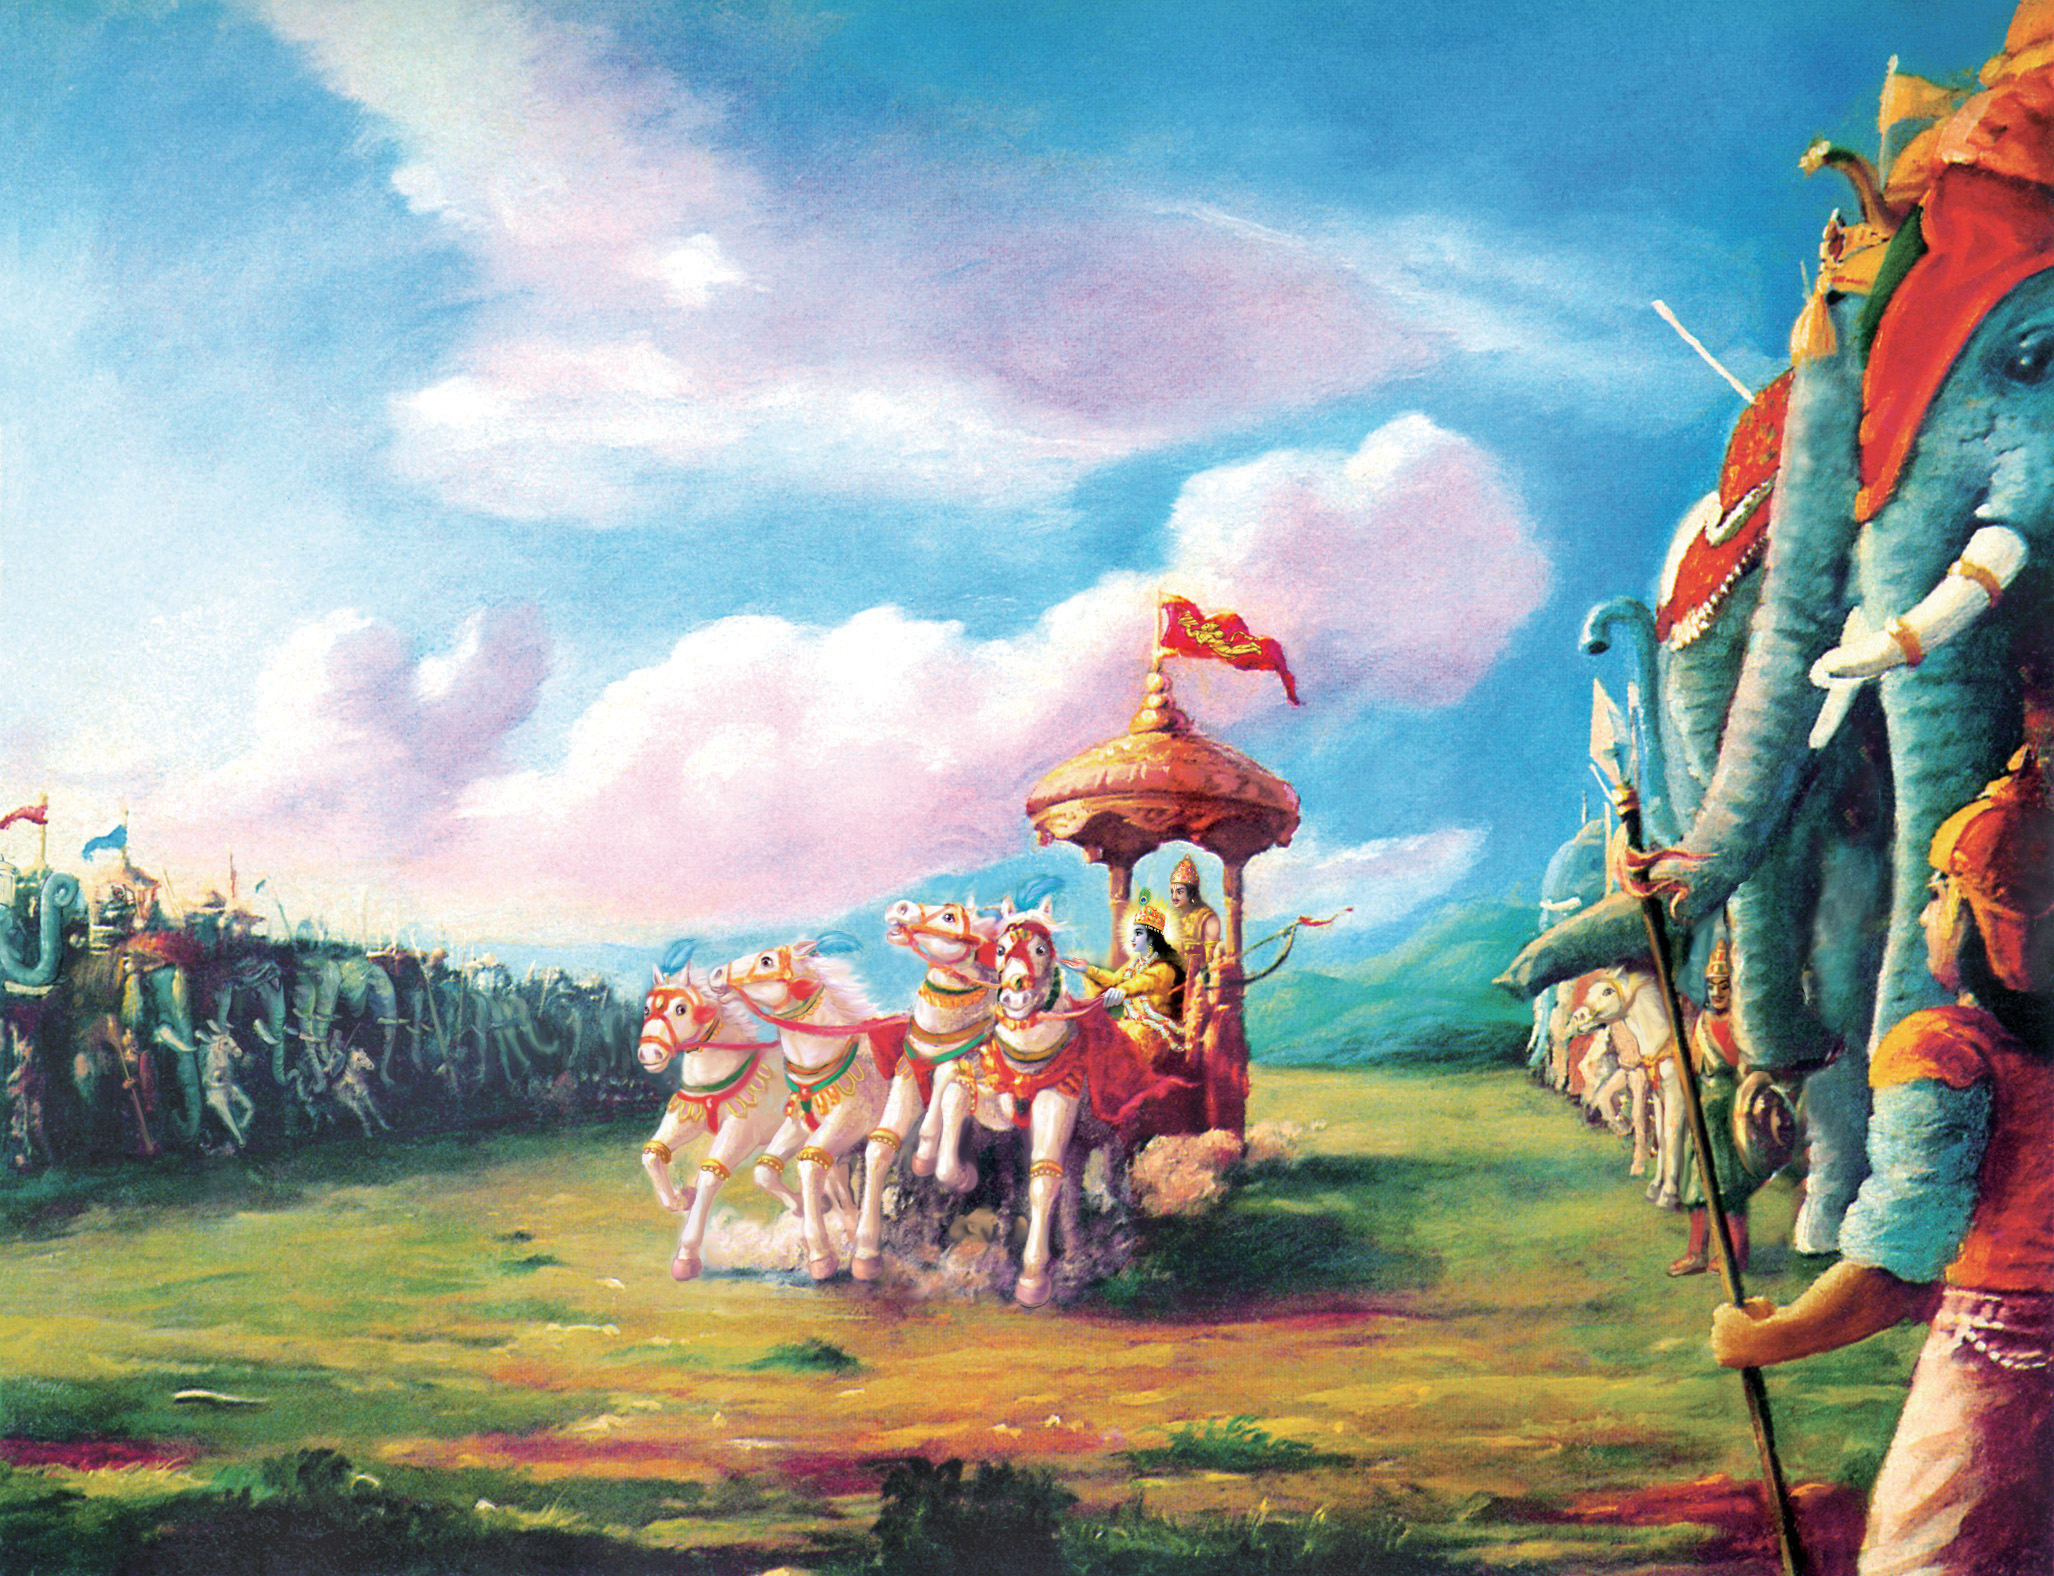 Bhagavad Gita: Krishna and Arjuna in the midst of the two armies.